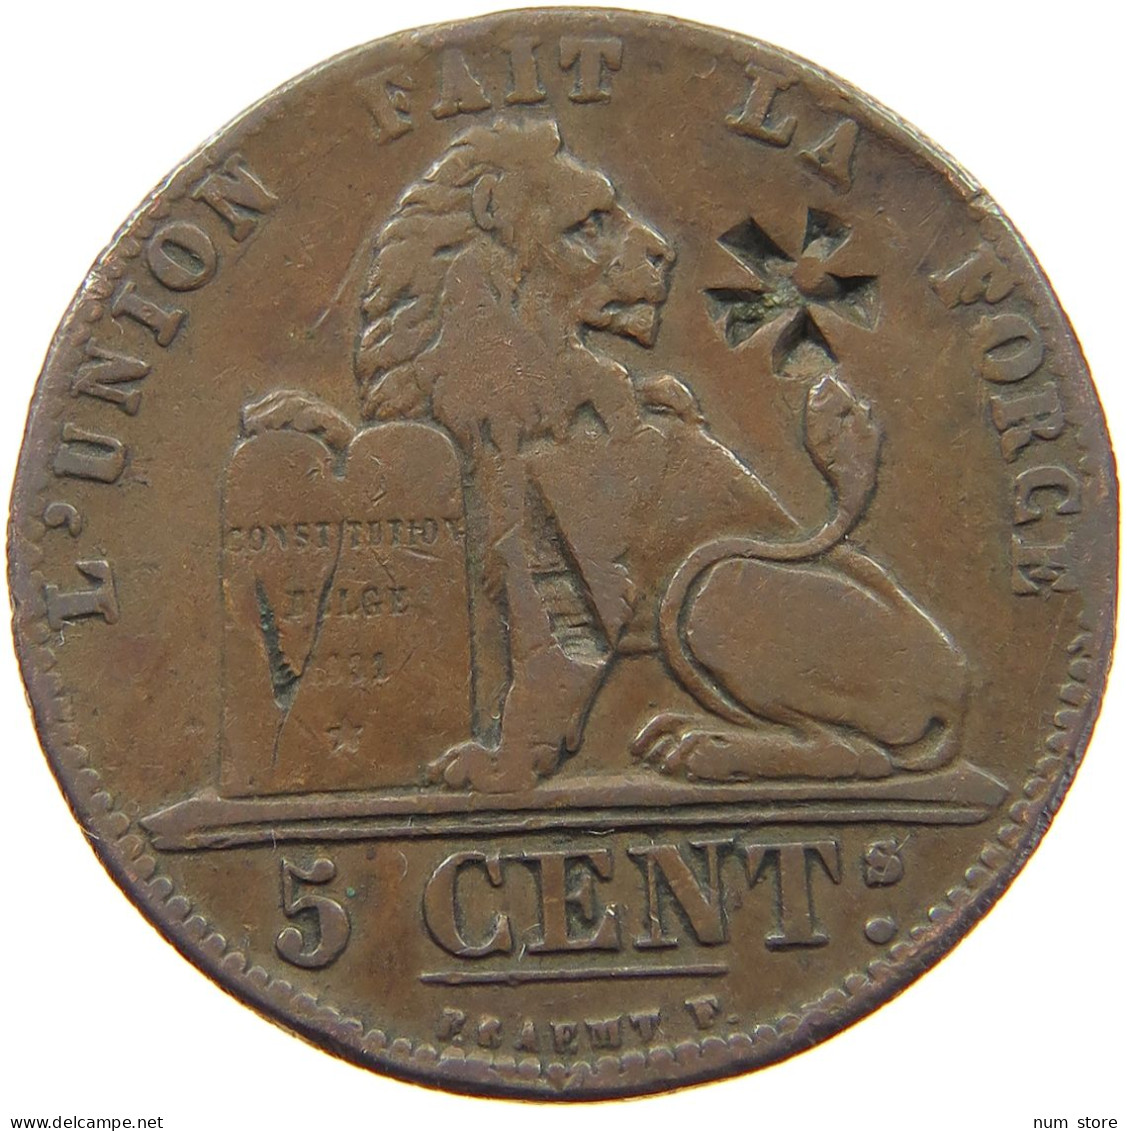 BELGIUM 5 CENTIMES 1847 5 CENTIMES 1847 COUNTERMARKED #t132 0585 - 5 Centimes